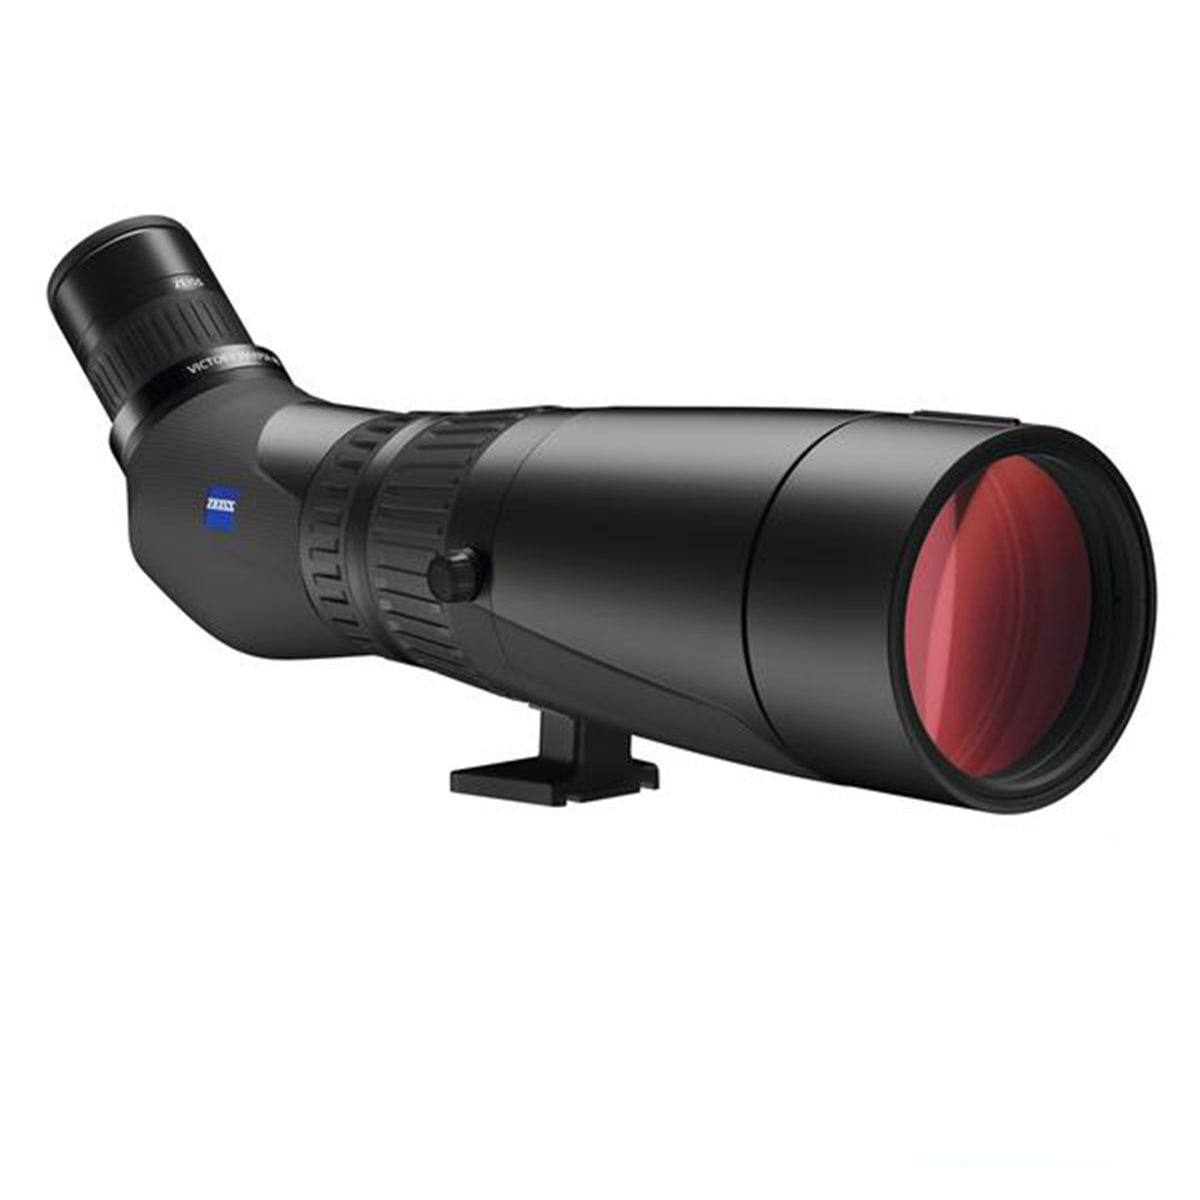 Zeiss Victory Harpia 22-65x85 Angled Spotting Scope in Zeiss Victory Harpia 22-65x85 Angled Spotting Scope by Zeiss | Optics - goHUNT Shop by GOHUNT | Zeiss - GOHUNT Shop